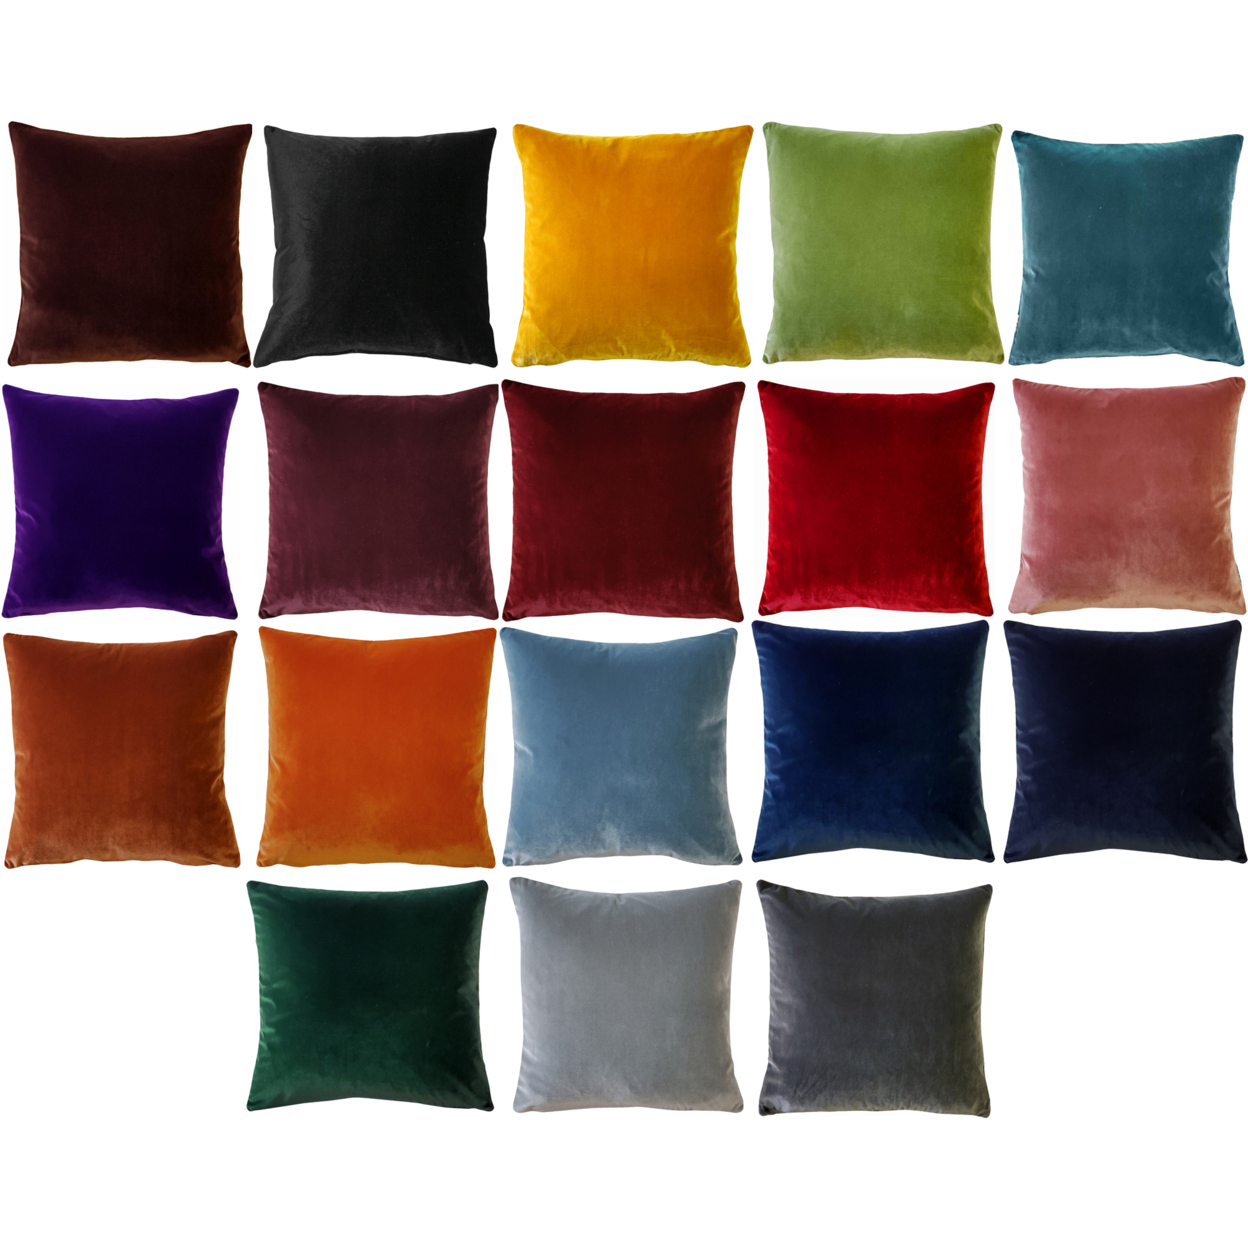 Castello Velvet Throw Pillows, Complete Pillow With Polyfill Pillow Insert (18 Colors, 3 Sizes) - Midnight Blue, 12x20